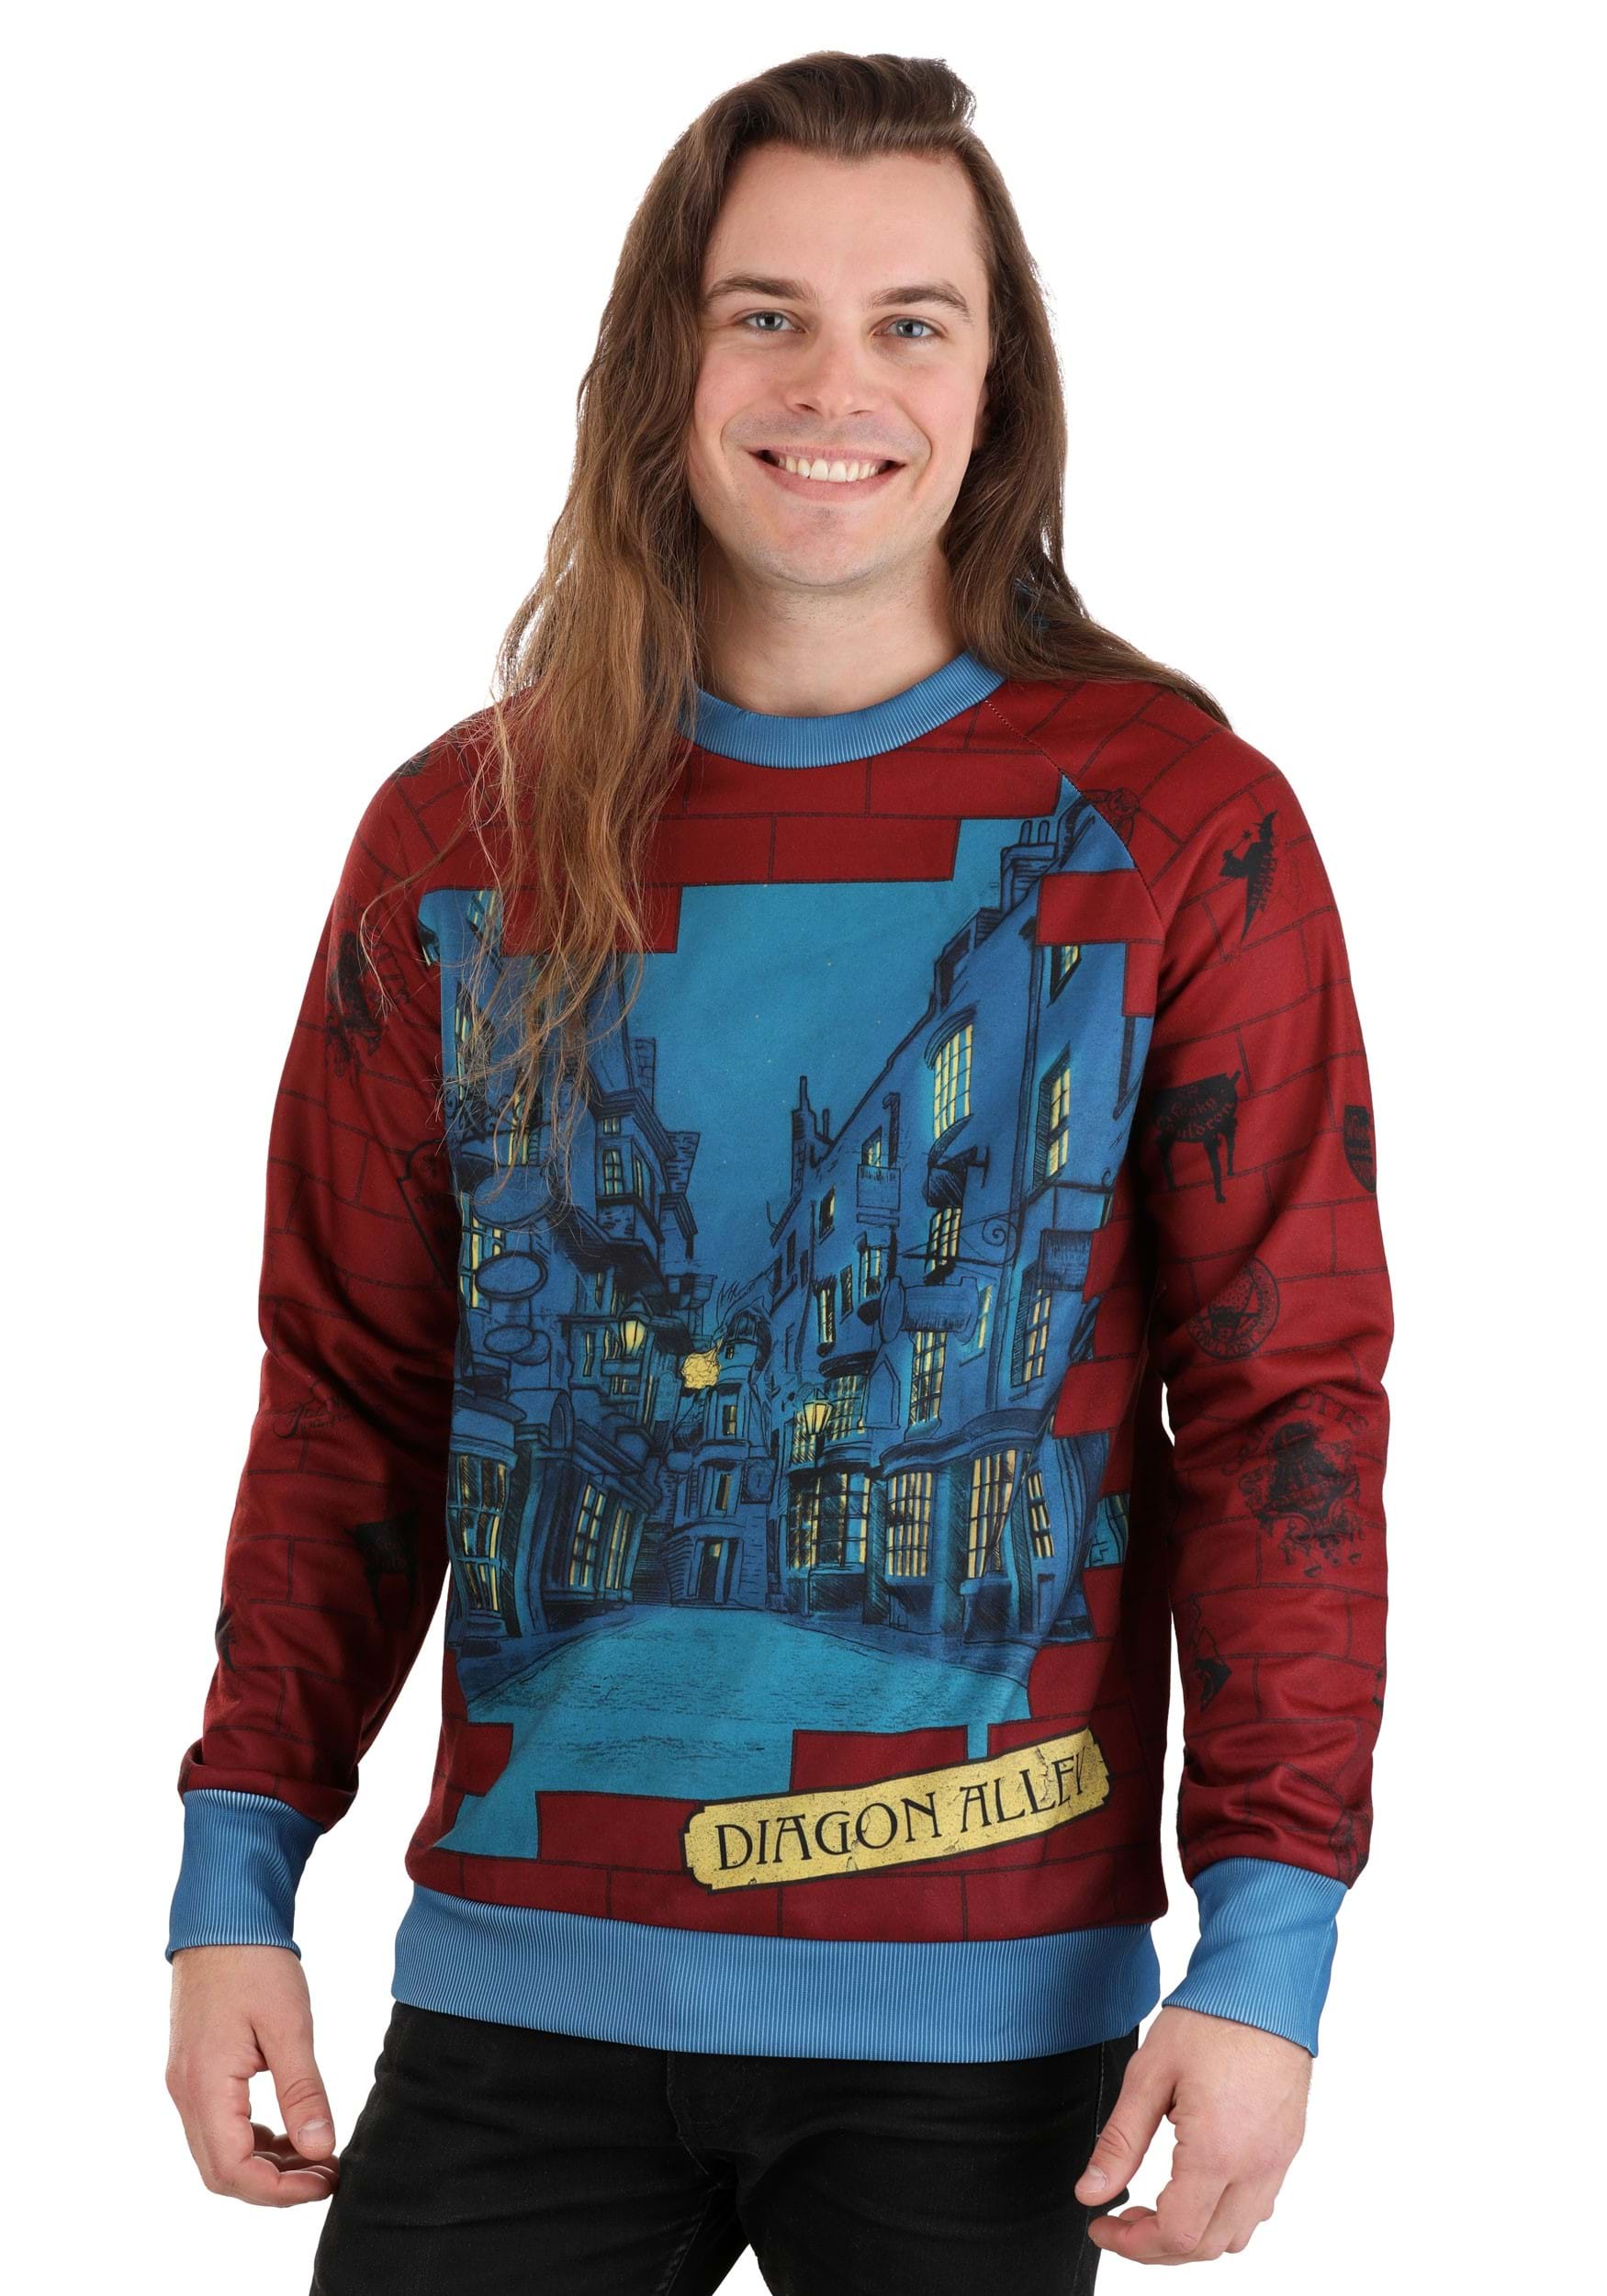 Diagon Alley Harry Potter Adult Sweater